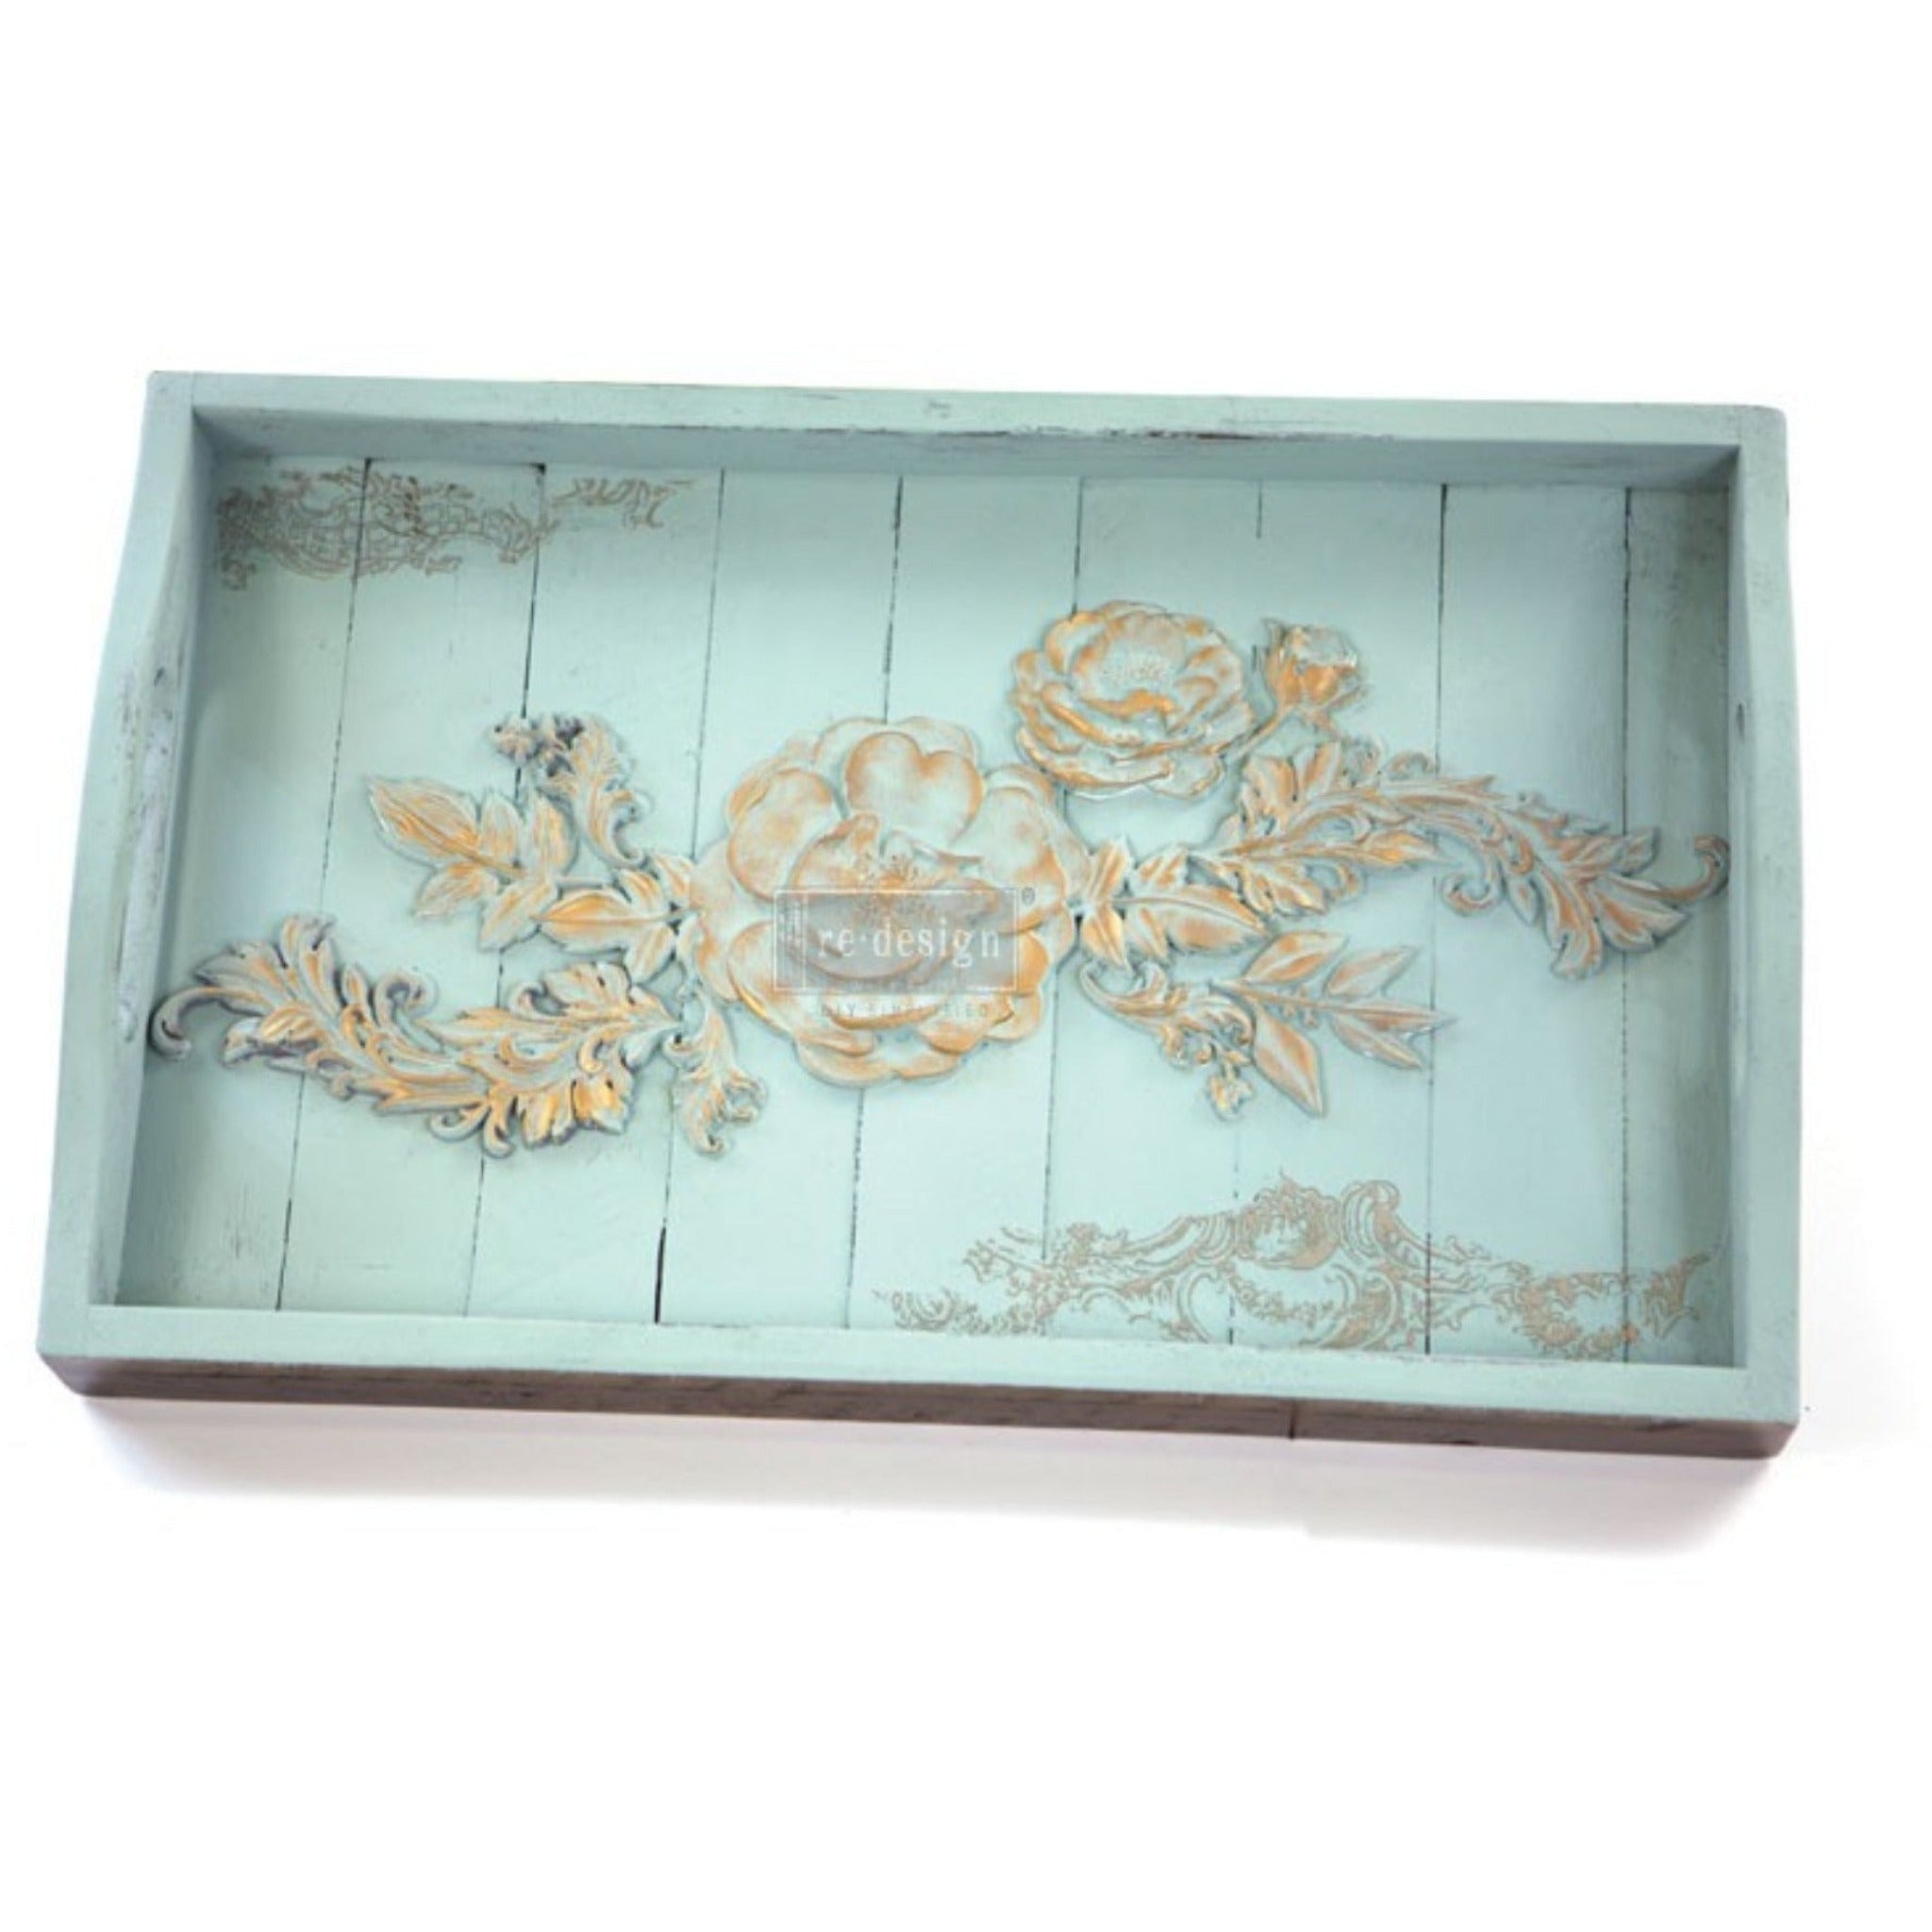 A wood serving tray is painted pale blue and features ReDesign with Prima's Baroque Swirls silicone mold casting inside of the tray.